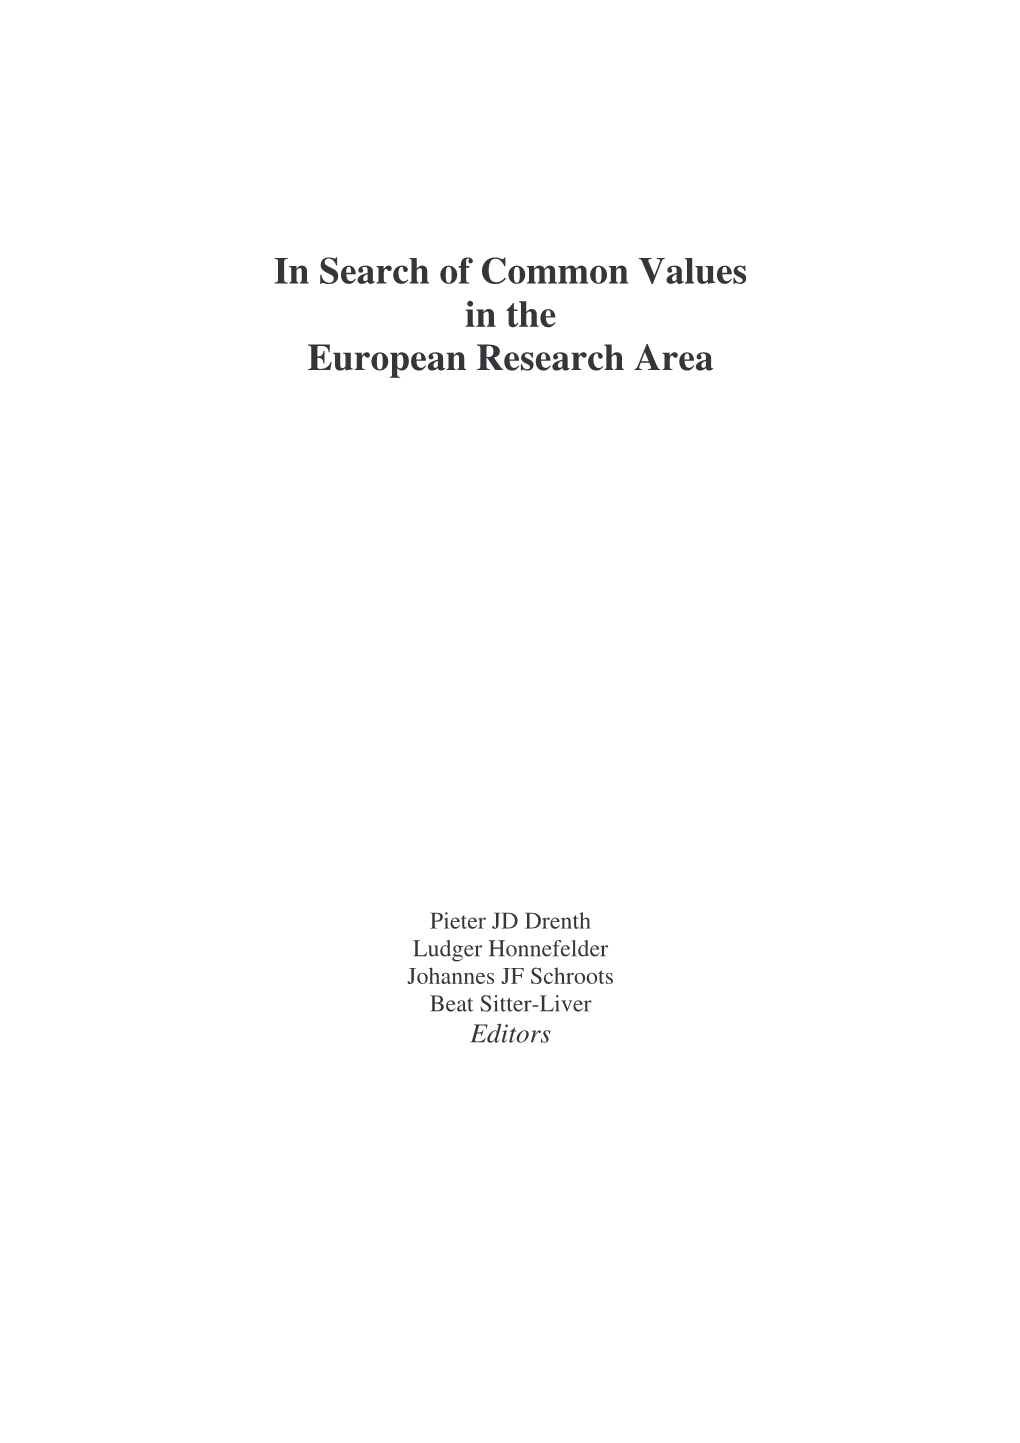 In Search of Common Values in the European Research Area